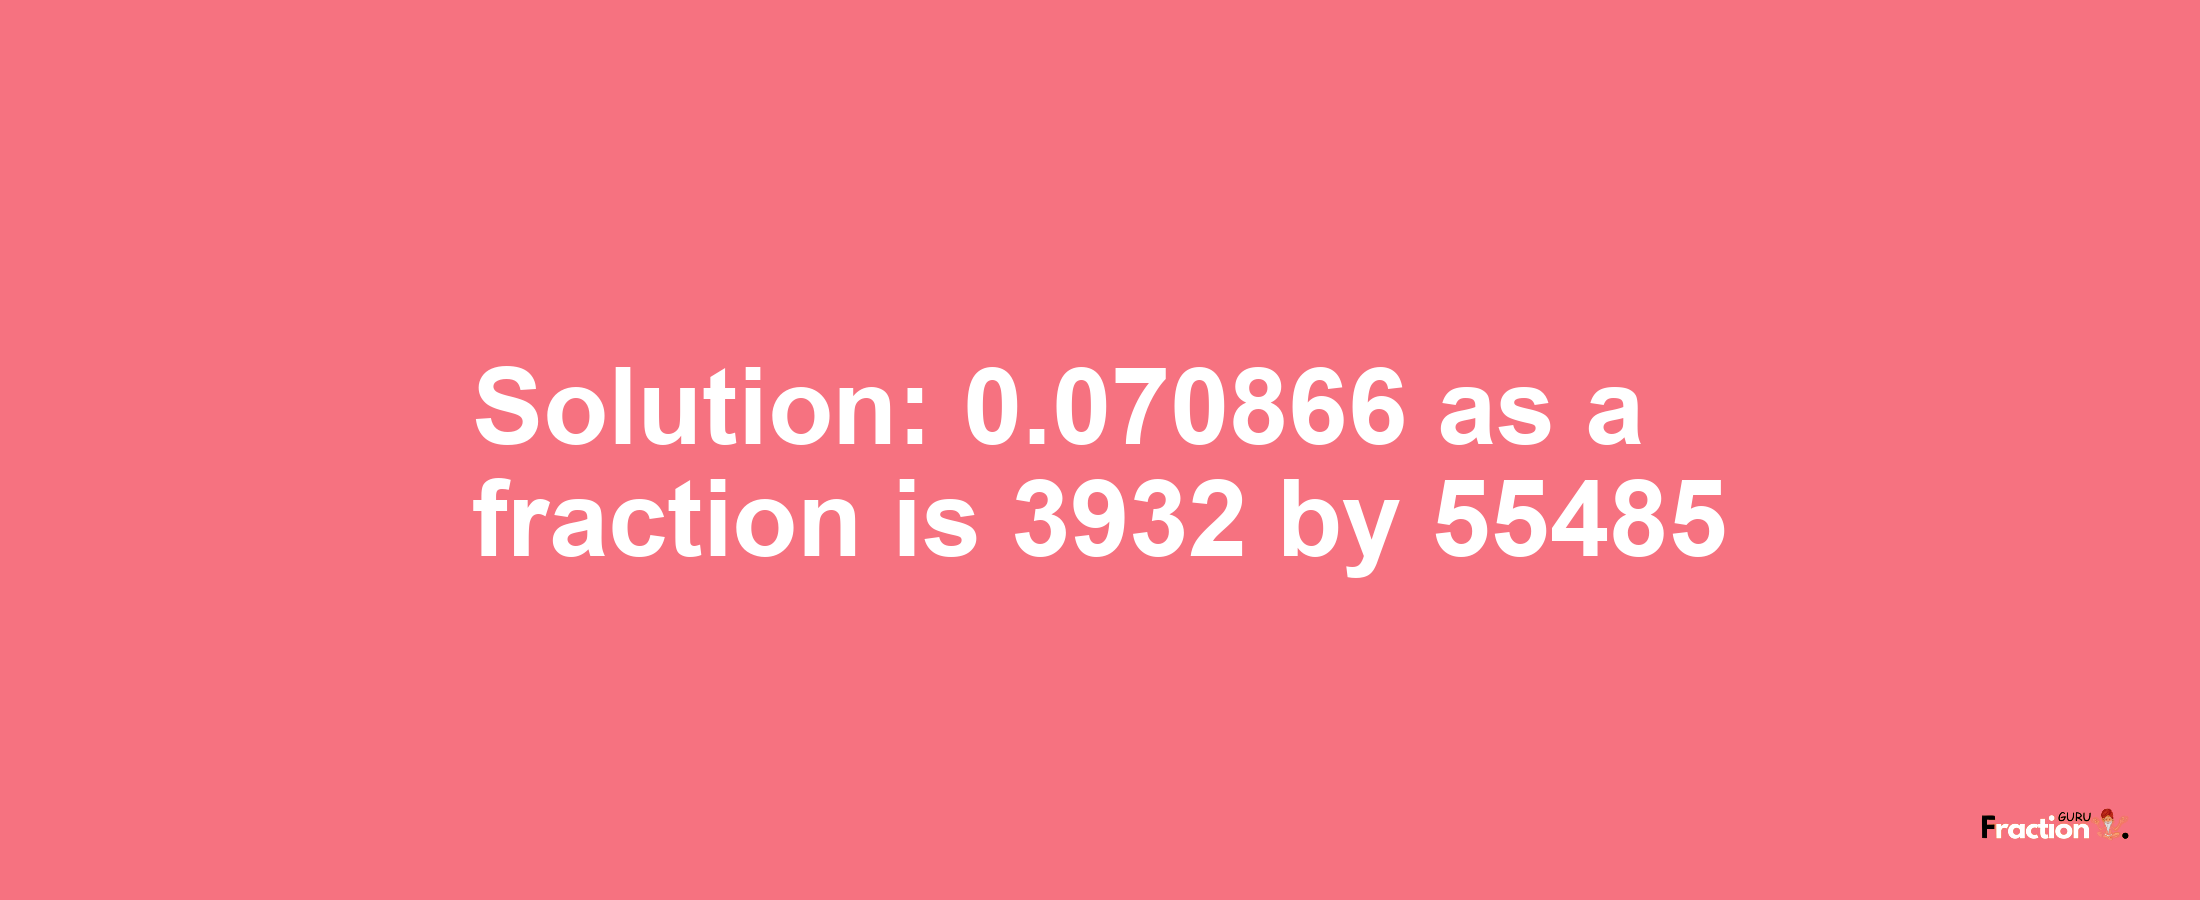 Solution:0.070866 as a fraction is 3932/55485